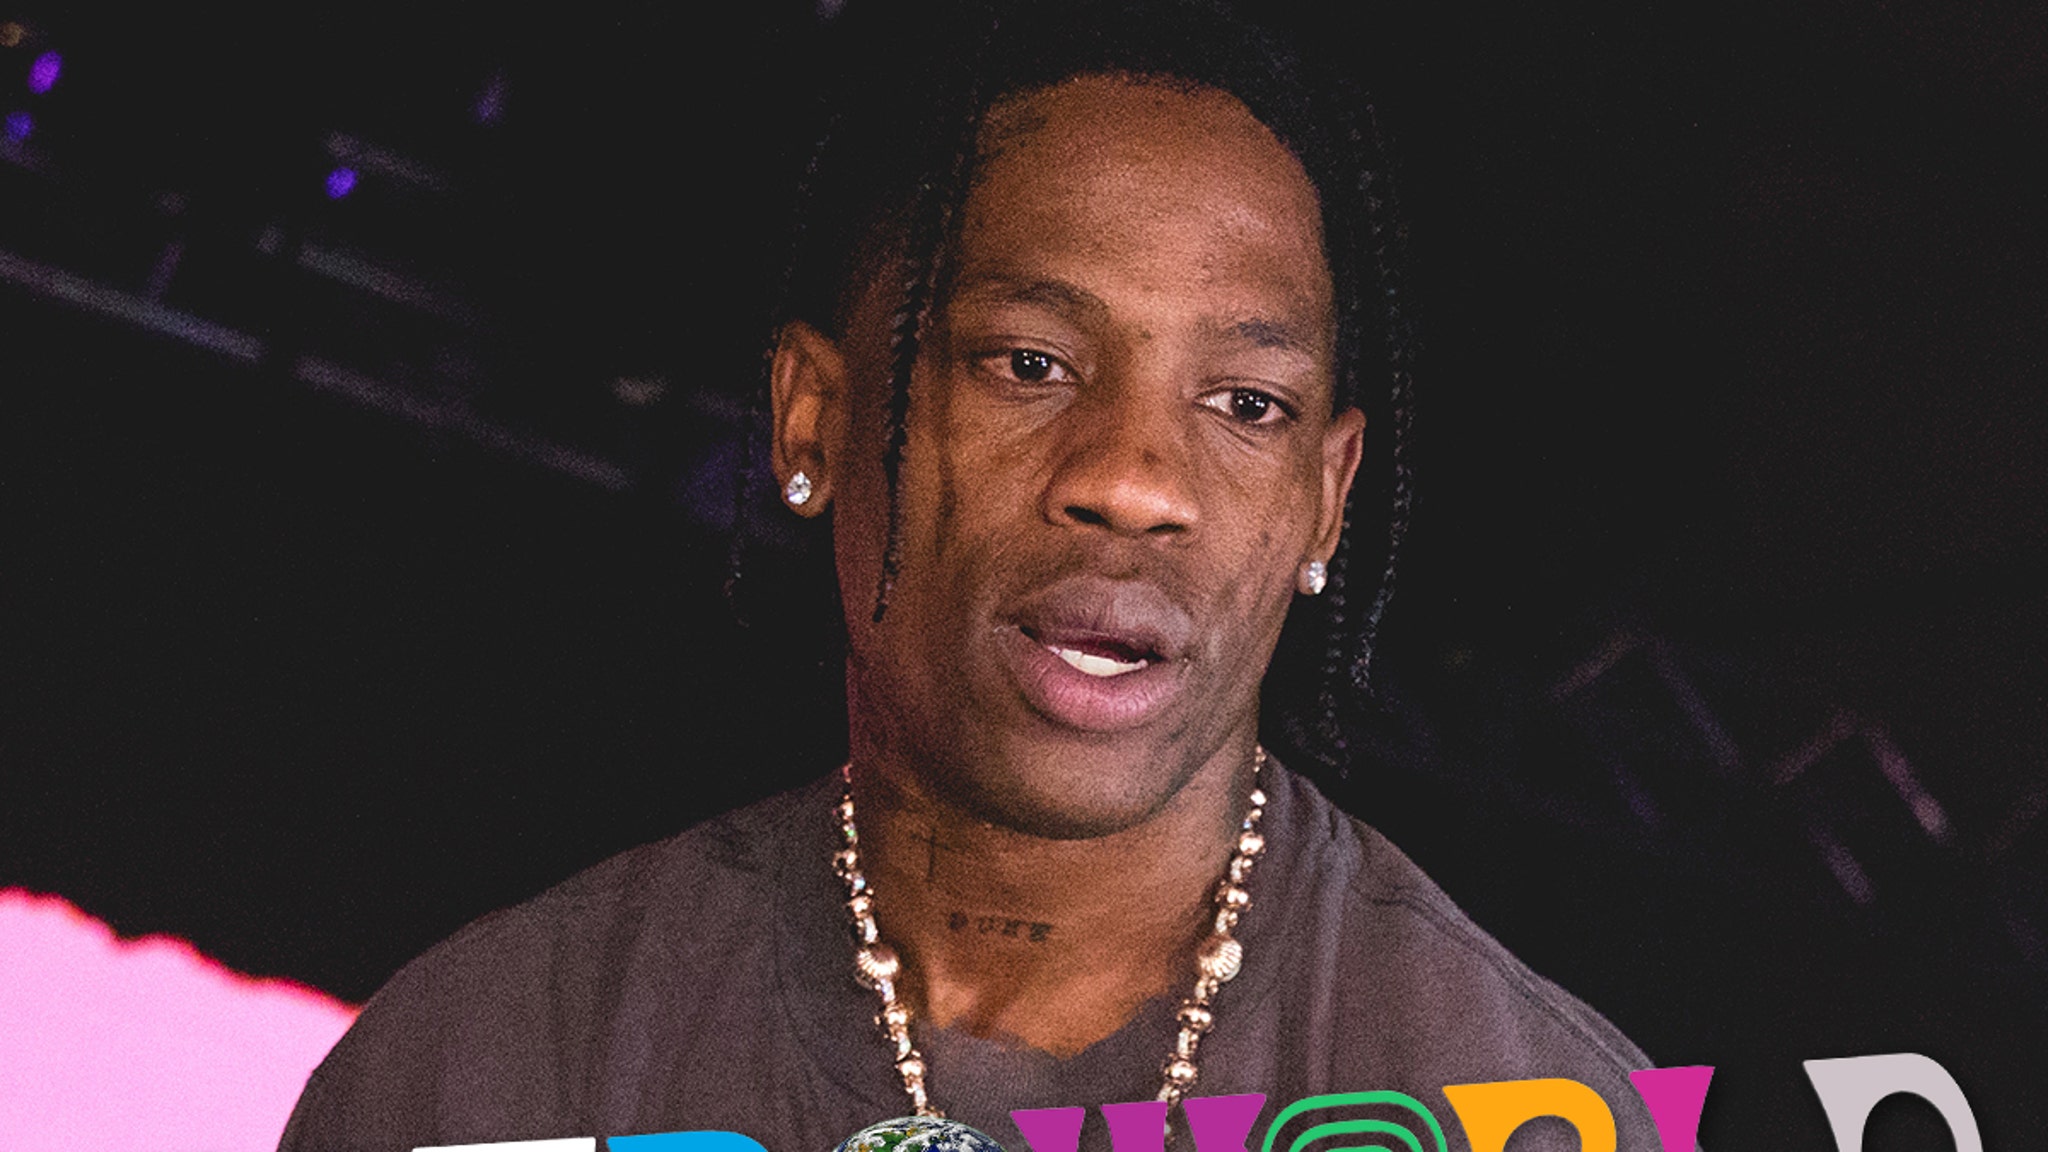 Travis Scott Wants Astroworld Suit Dismissed, Files First Response of Many